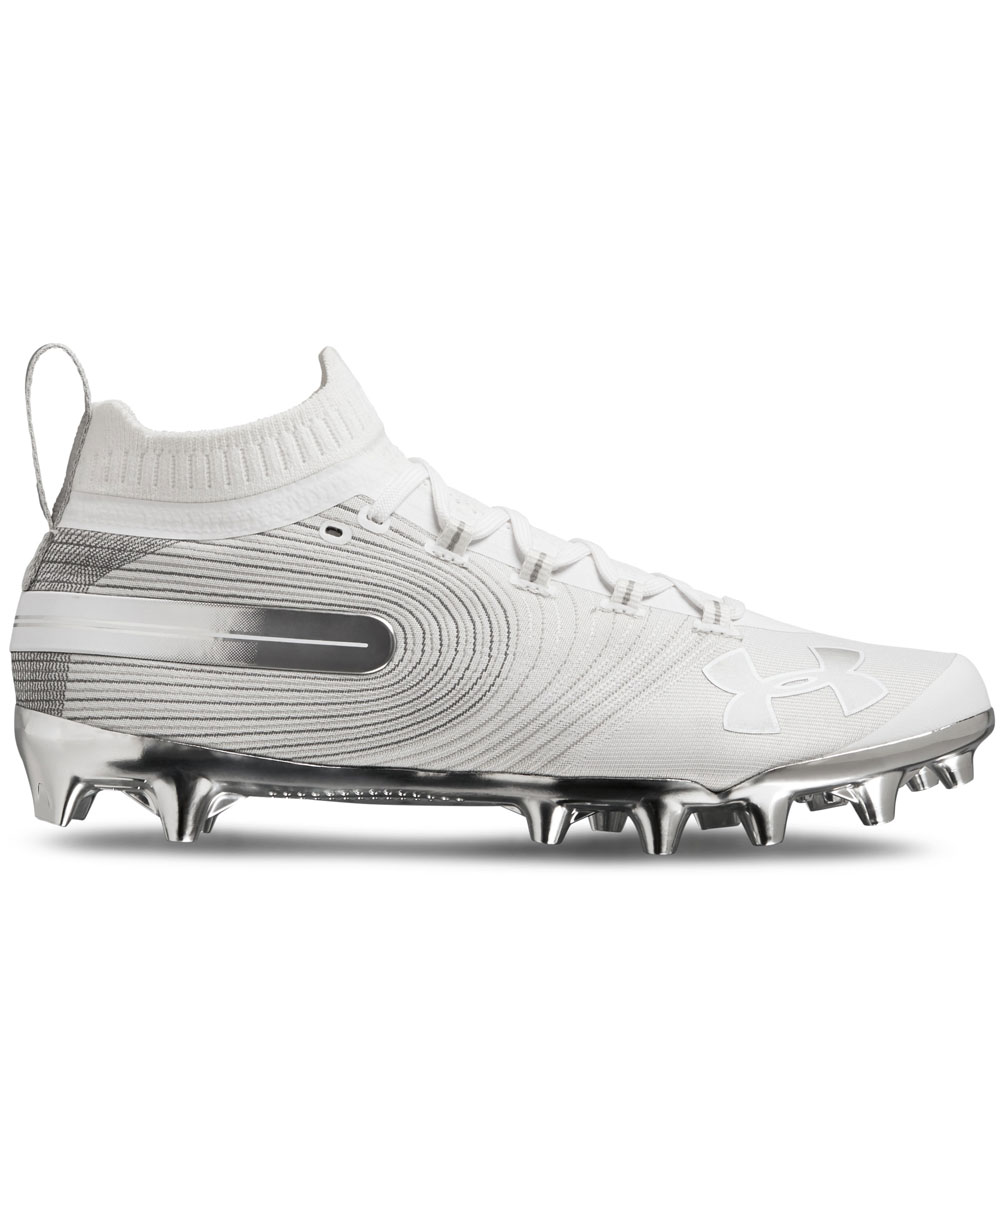 under armour white cleats